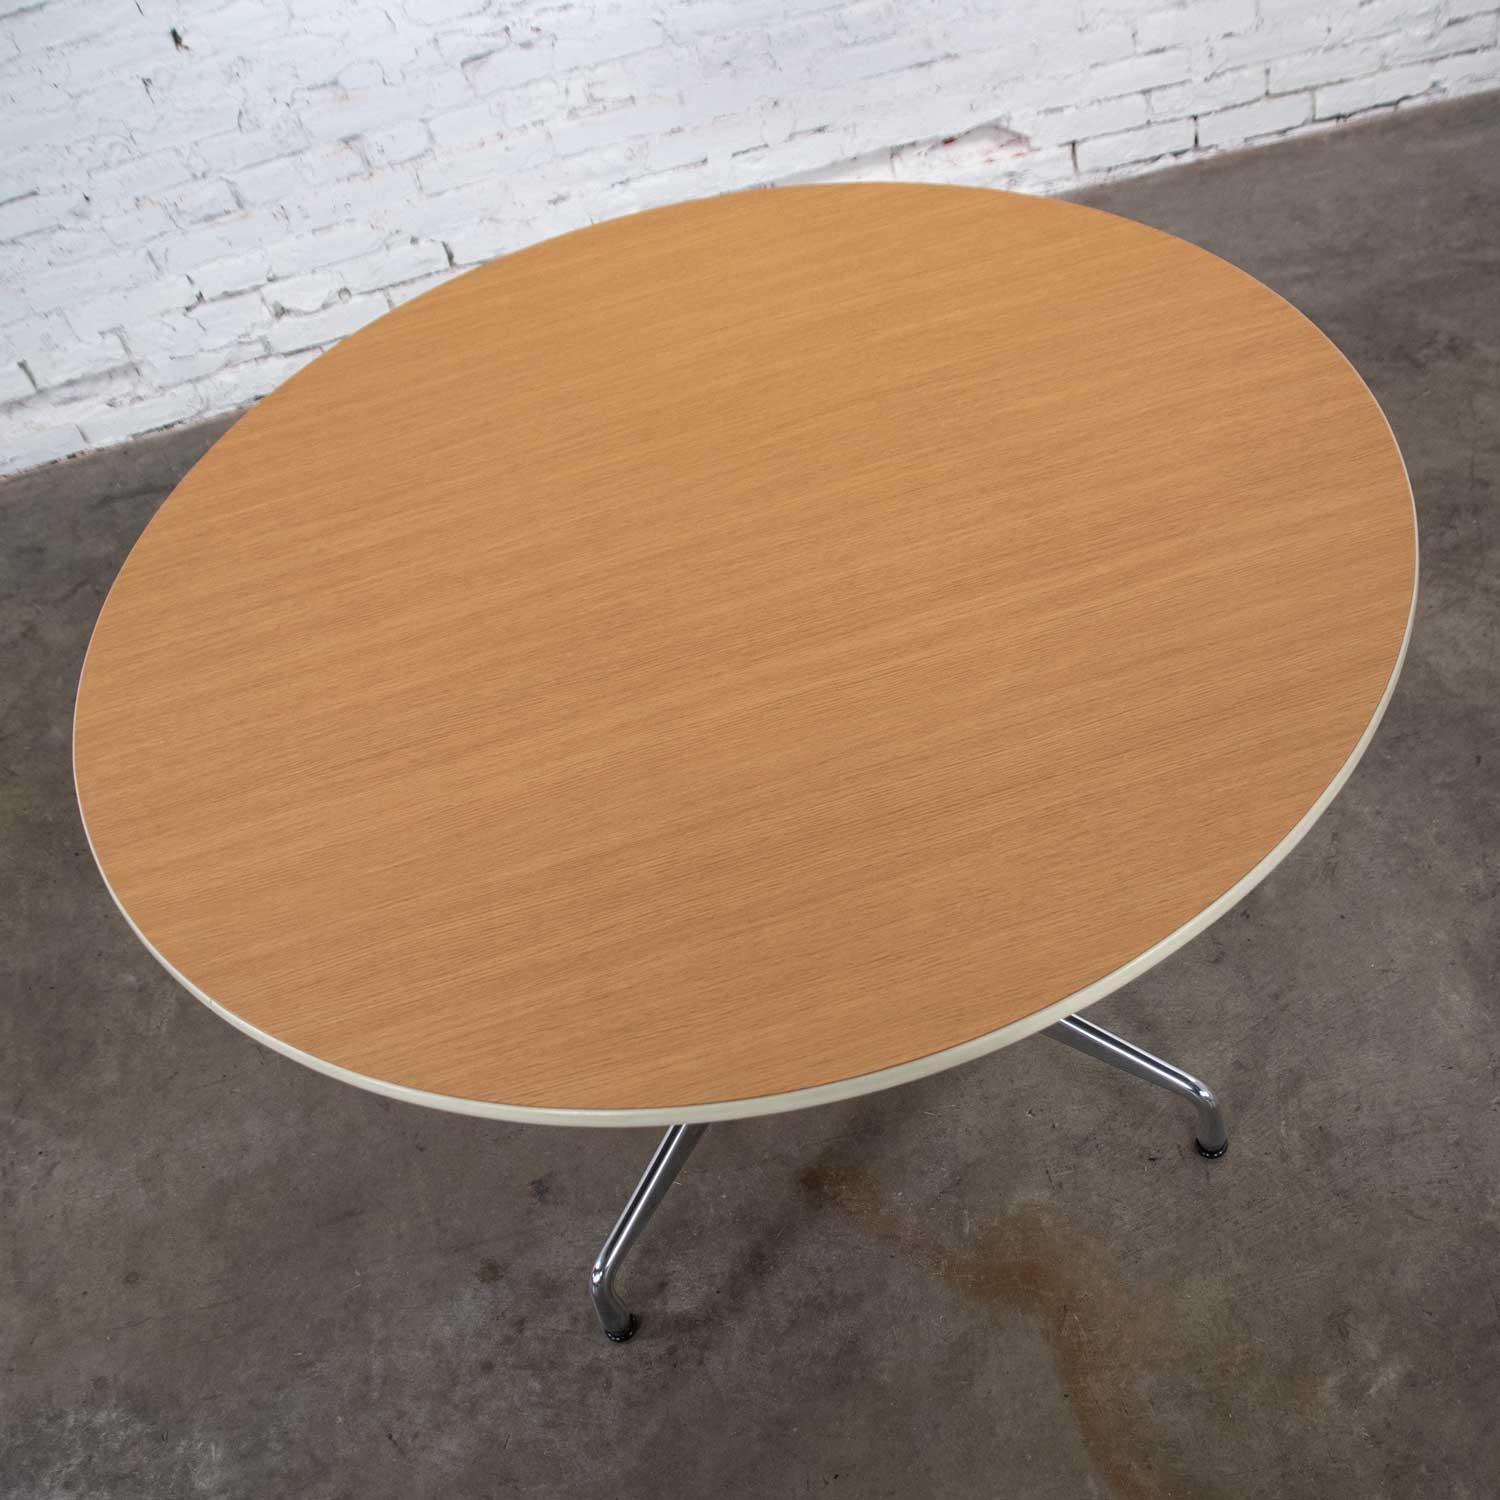 20th Century Eames Herman Miller Round Table Universal Base Wood Grain Laminate Top For Sale